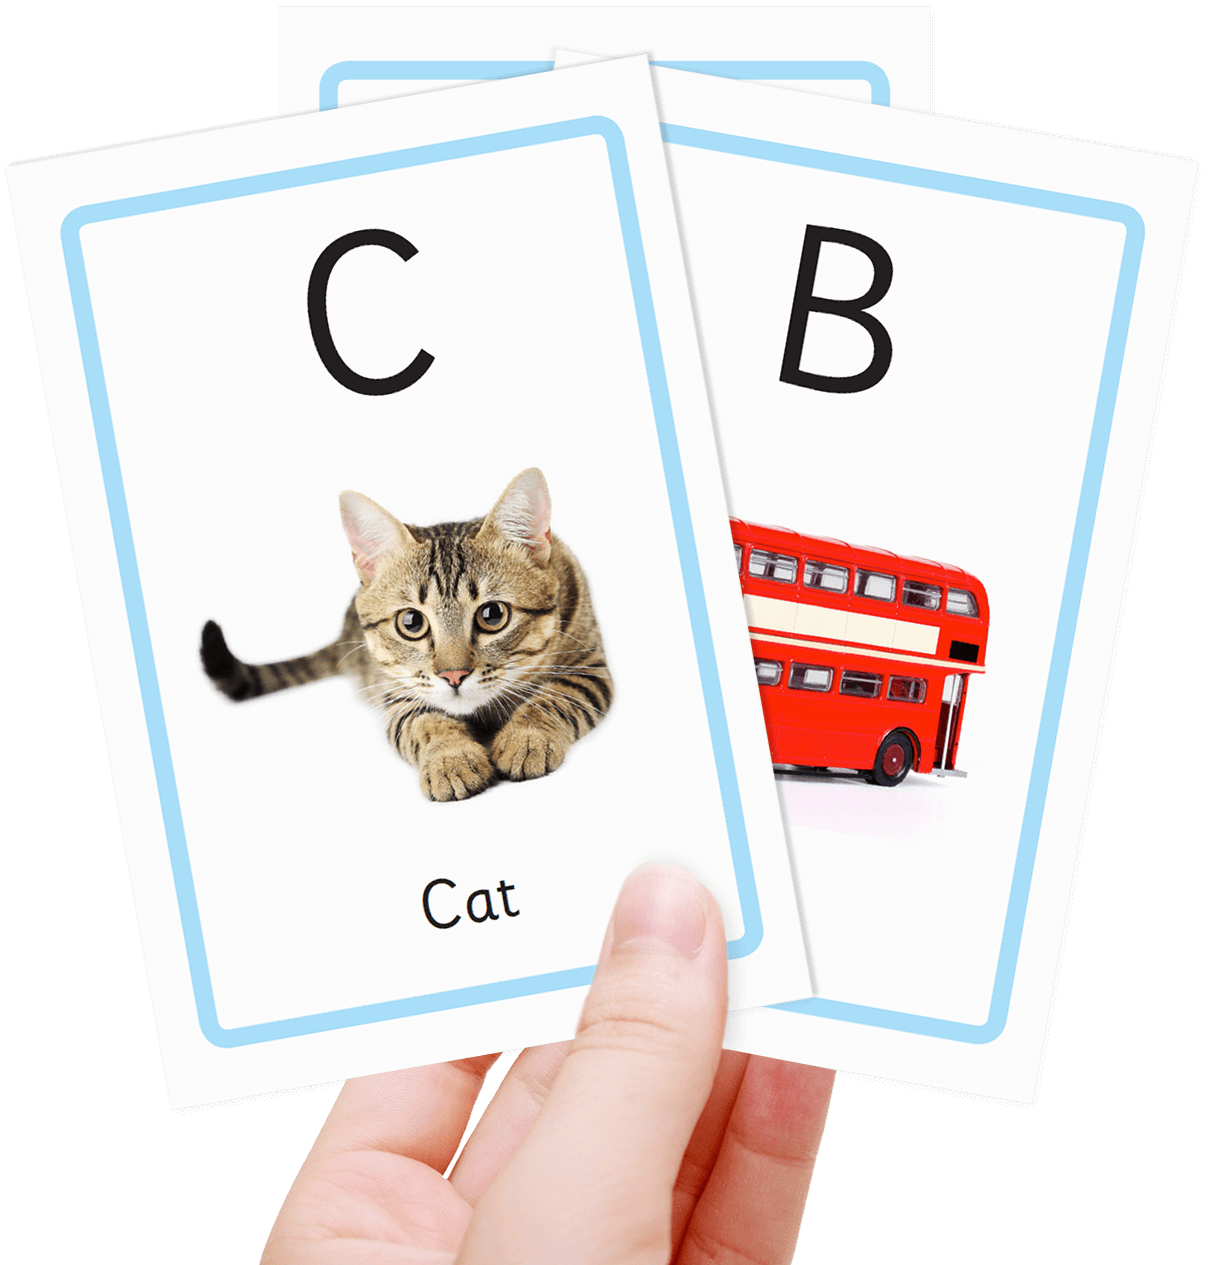 Free Flashcards For Kids - Free Printable Flash Cards - Totcards within Free Printable Flashcards For Toddlers